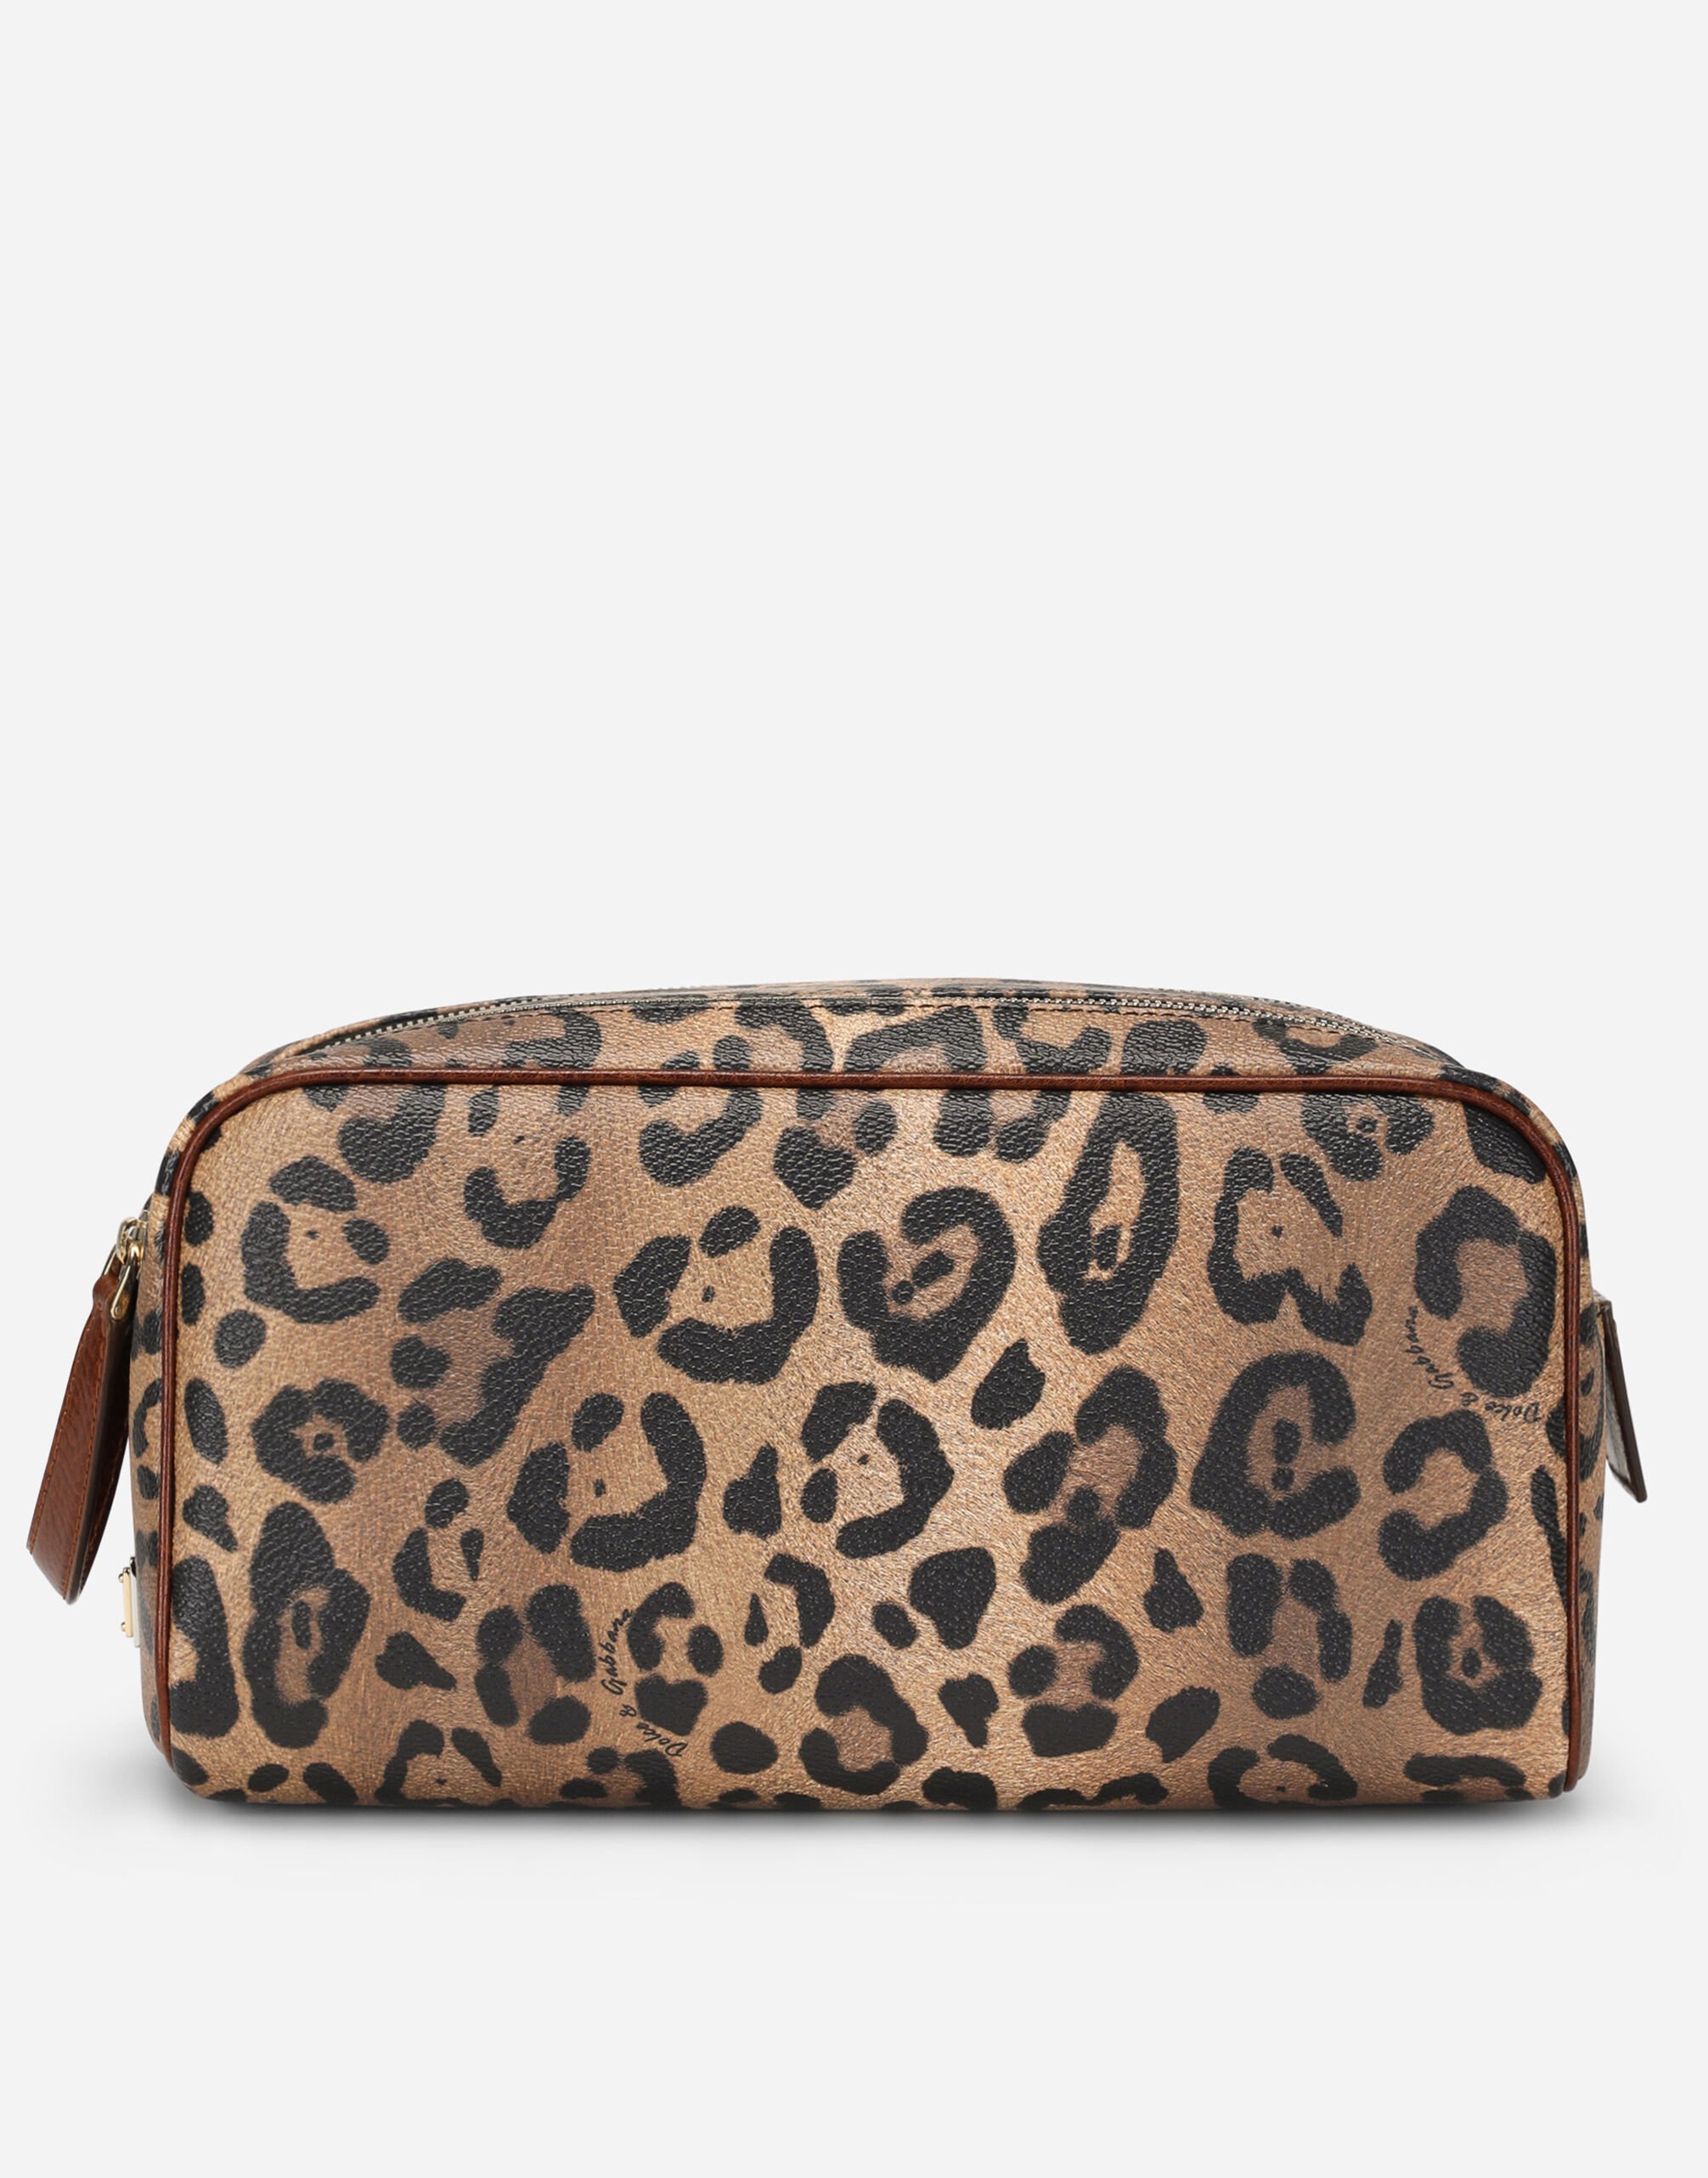 Dolce & Gabbana Leopard-print Crespo toiletry bag with branded plate Multicolor IF677WG7BPY